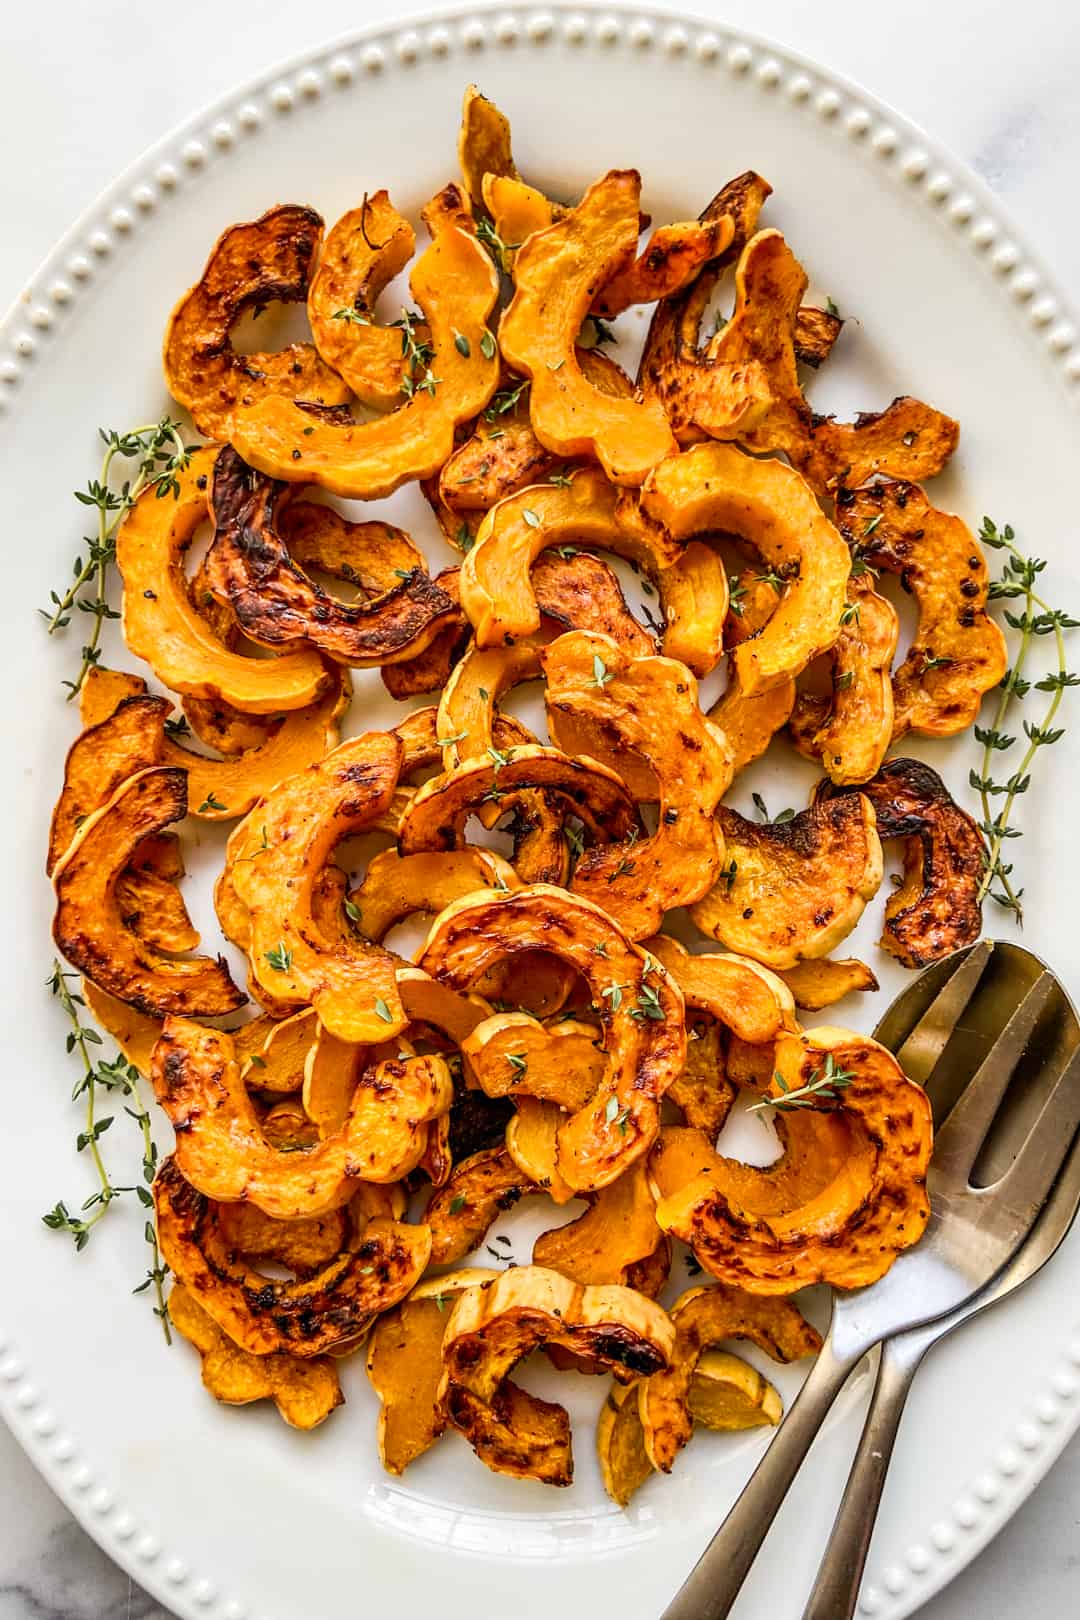 Delicata squash on a large white serving plate with a silver spoon and fork for serving.